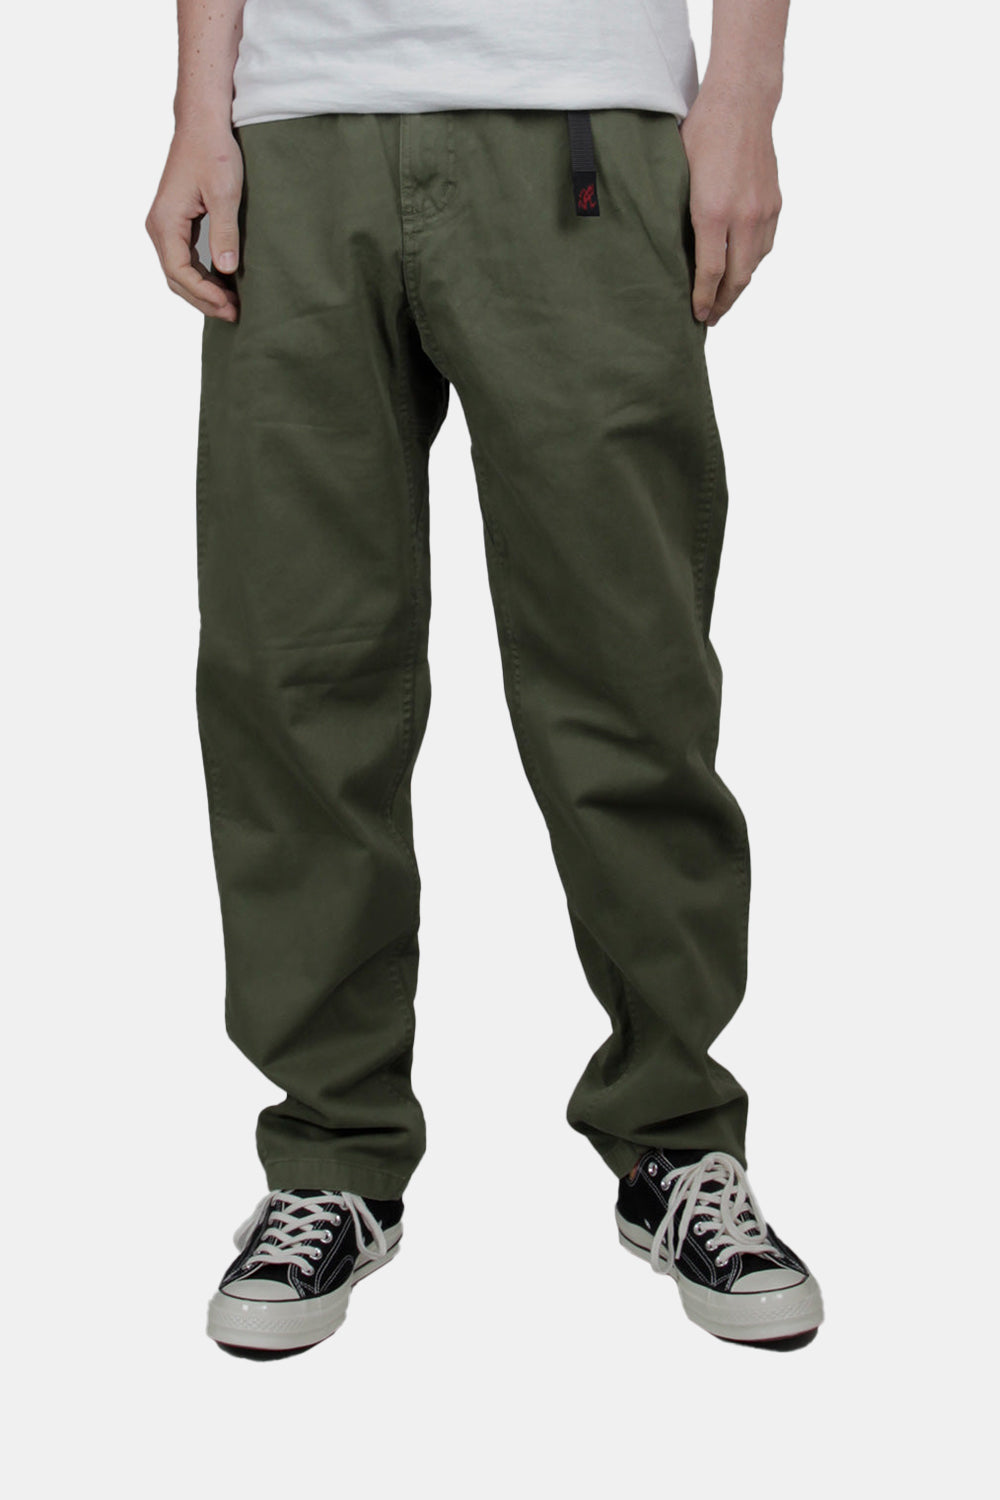 Gramicci G Pants Double-ringspun Organic Cotton Twill (Olive) | Number Six